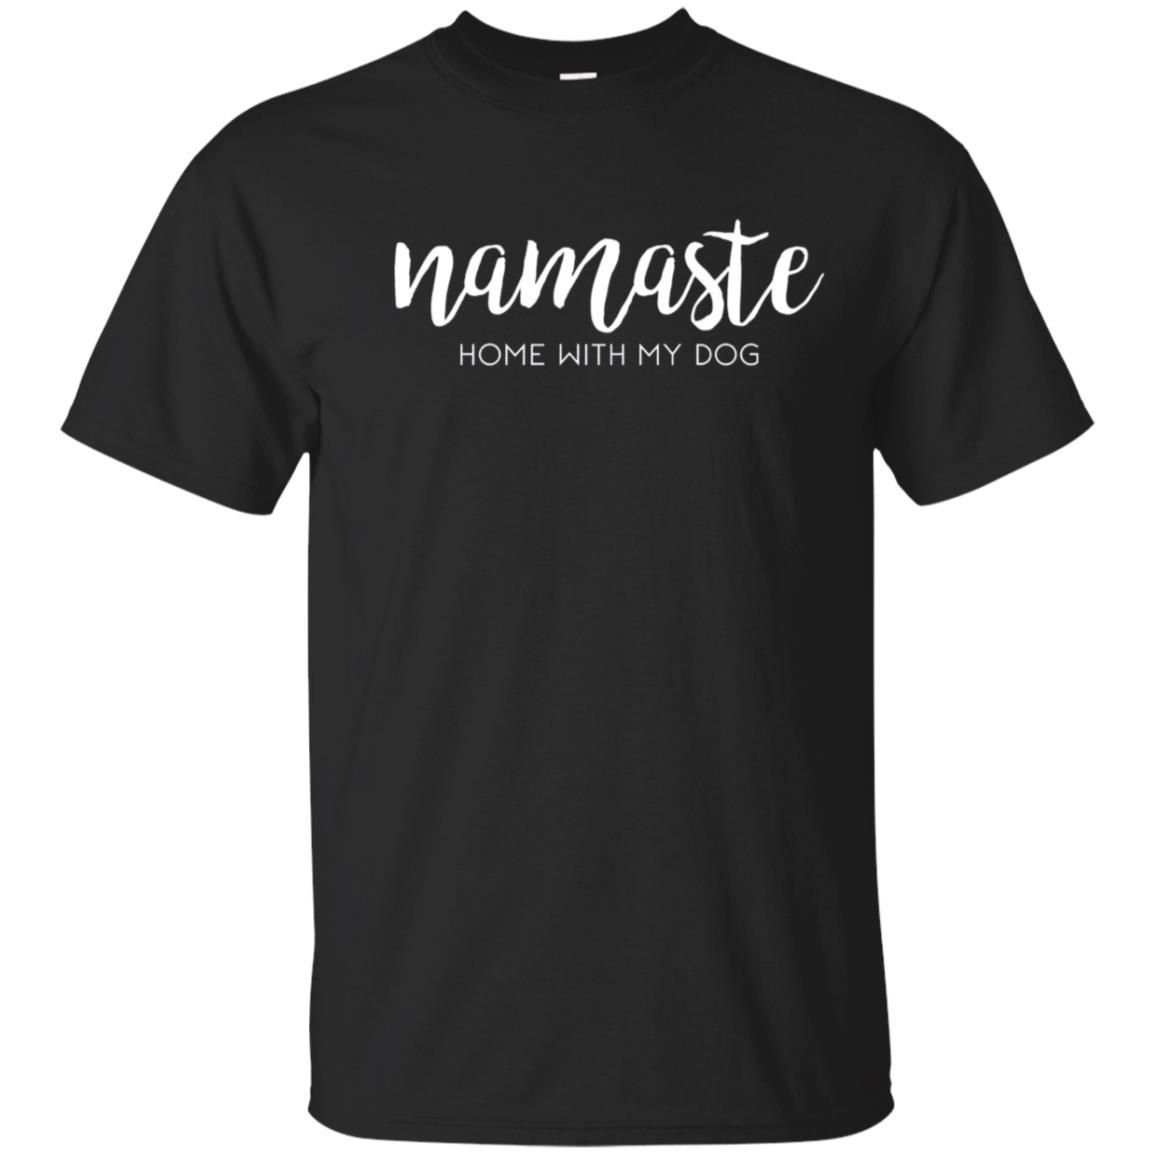 Check Out This Awesome Namaste Home With My Dog Funny Pet Parent Love Tshirt